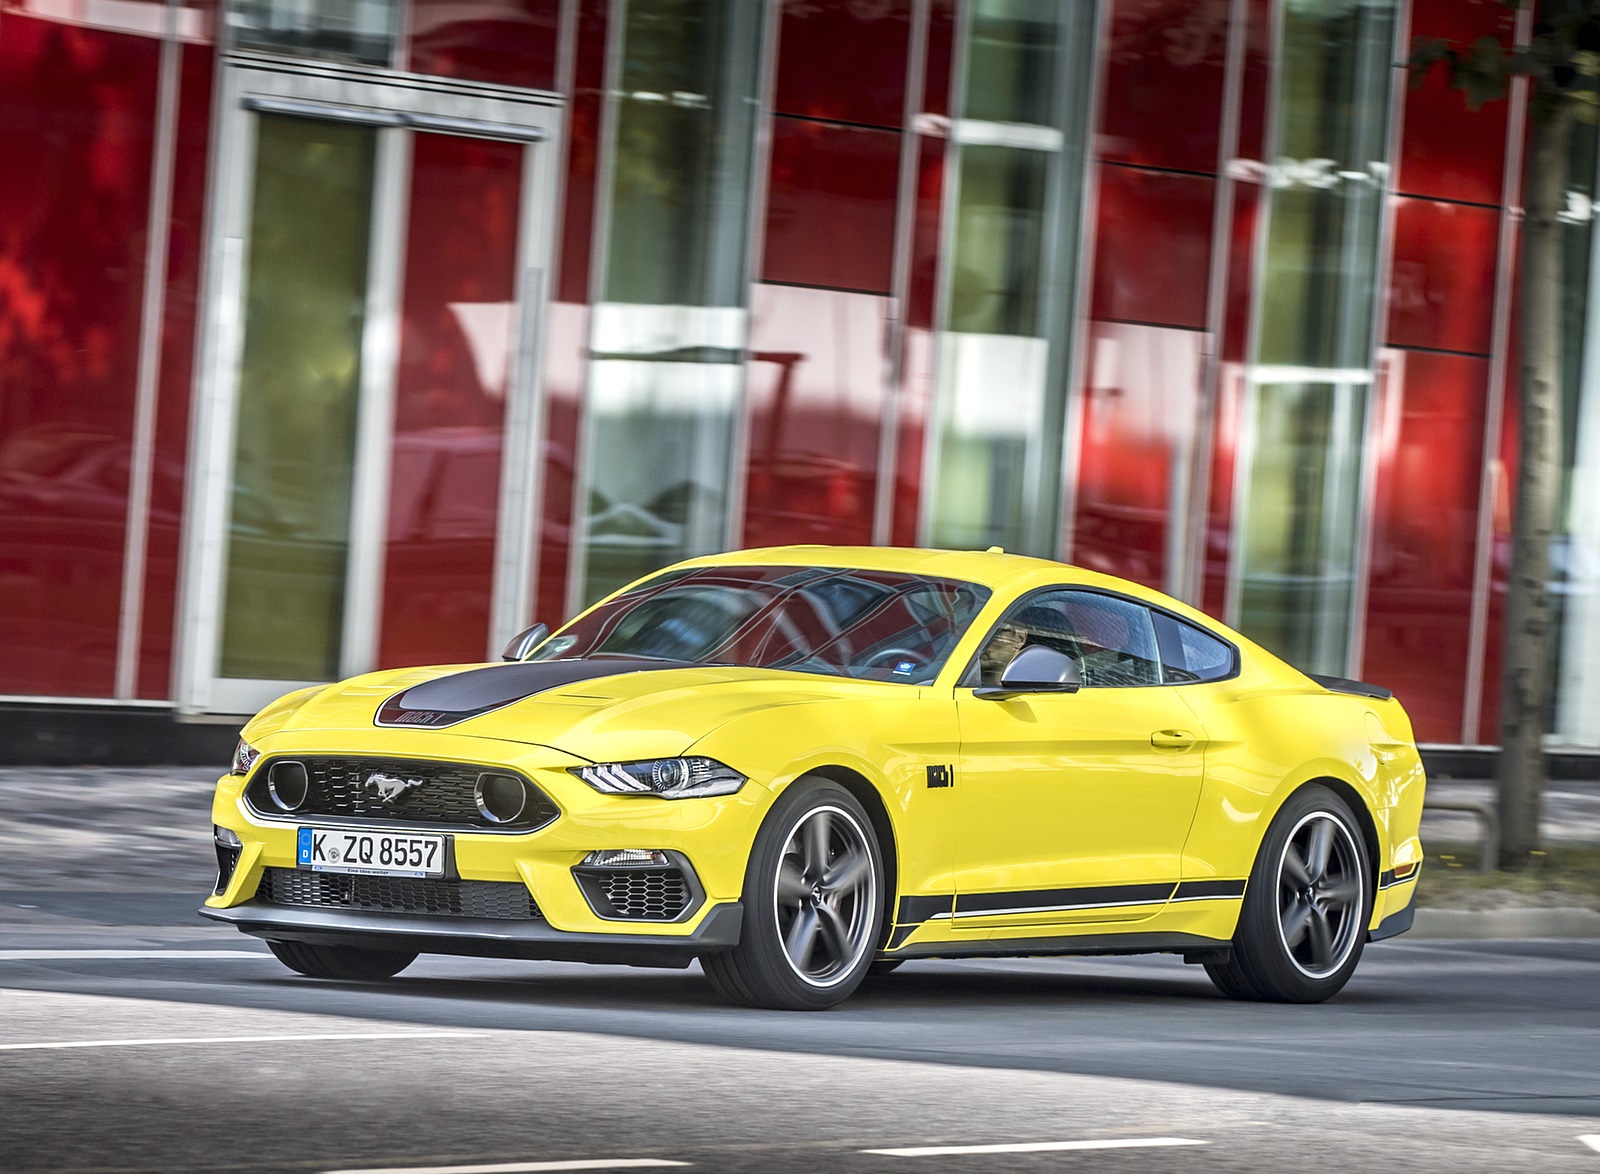 2021 Ford Mustang Mach 1 (EU-Spec) (Color: Grabber Yellow) Front Three-Quarter Wallpapers  #13 of 94